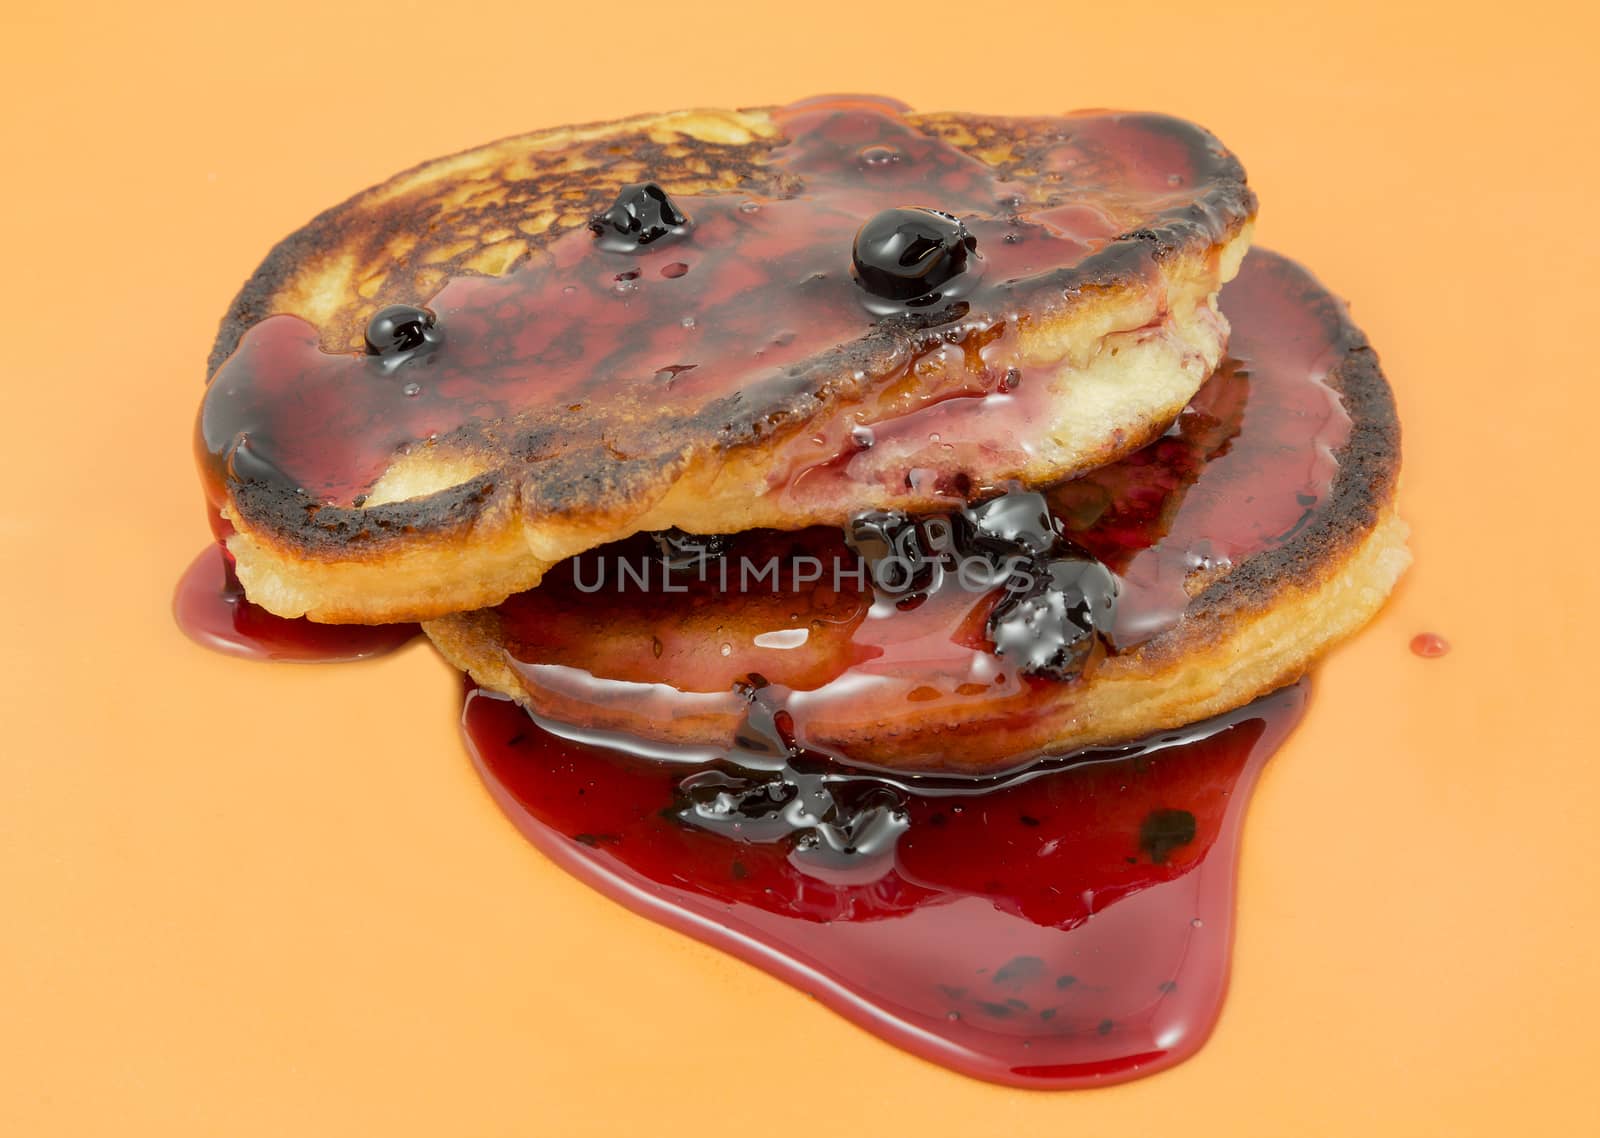 Pancakes with jam on a yellow background by sergeizubkov64